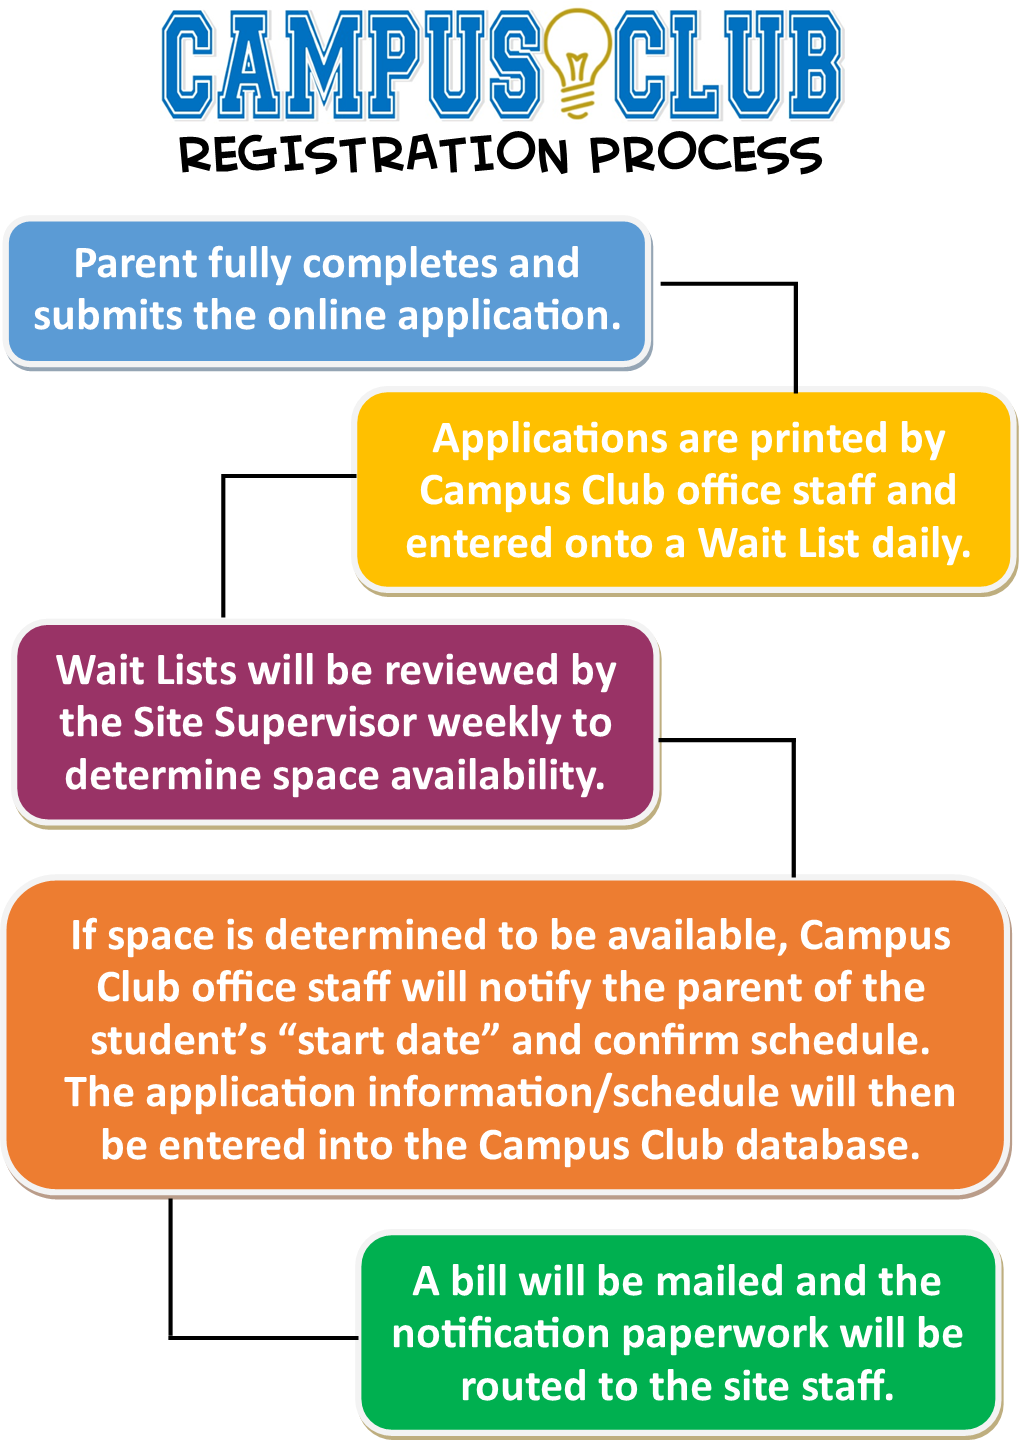 Registration Flow Chart - Parent completes online app, reviewed by Campus Club staff and entered onto waitlist if at capacity, waitlist is reviewed weekly and parents notified if space is available